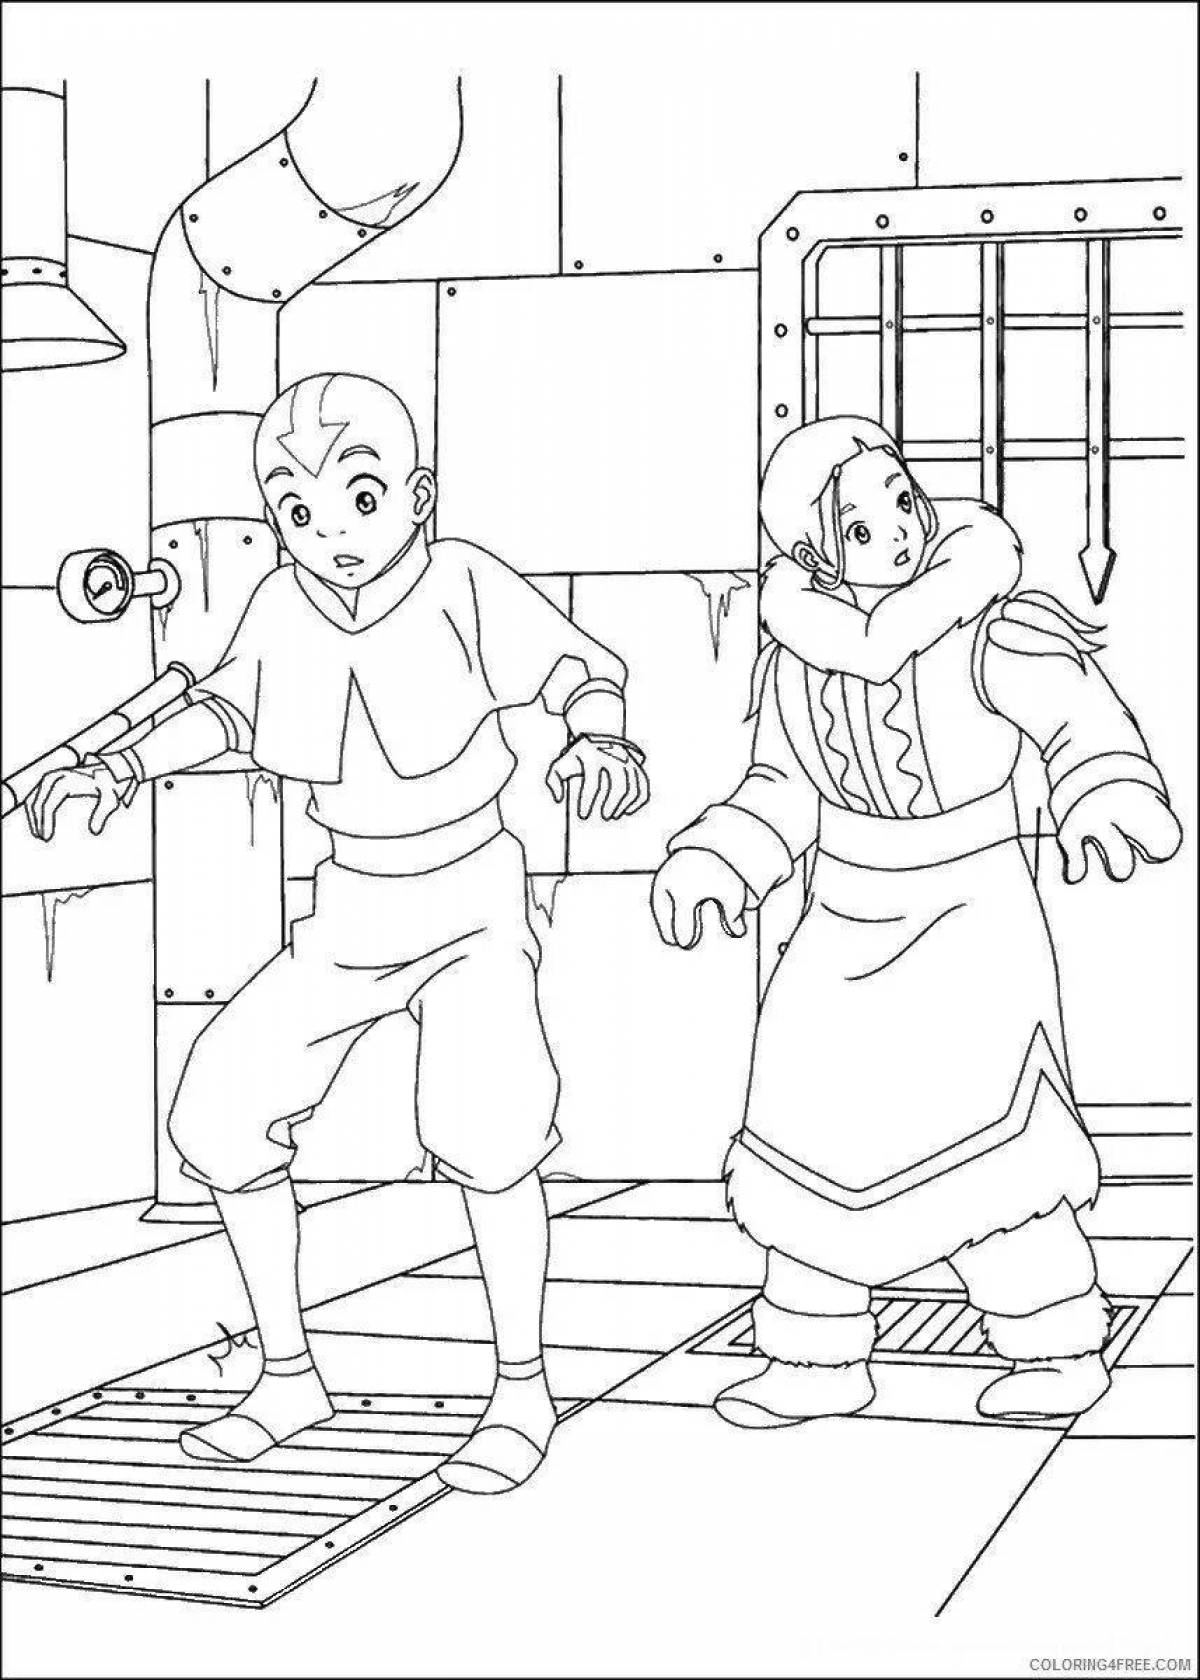 Fun Avatar Coloring Page The Last Airbender